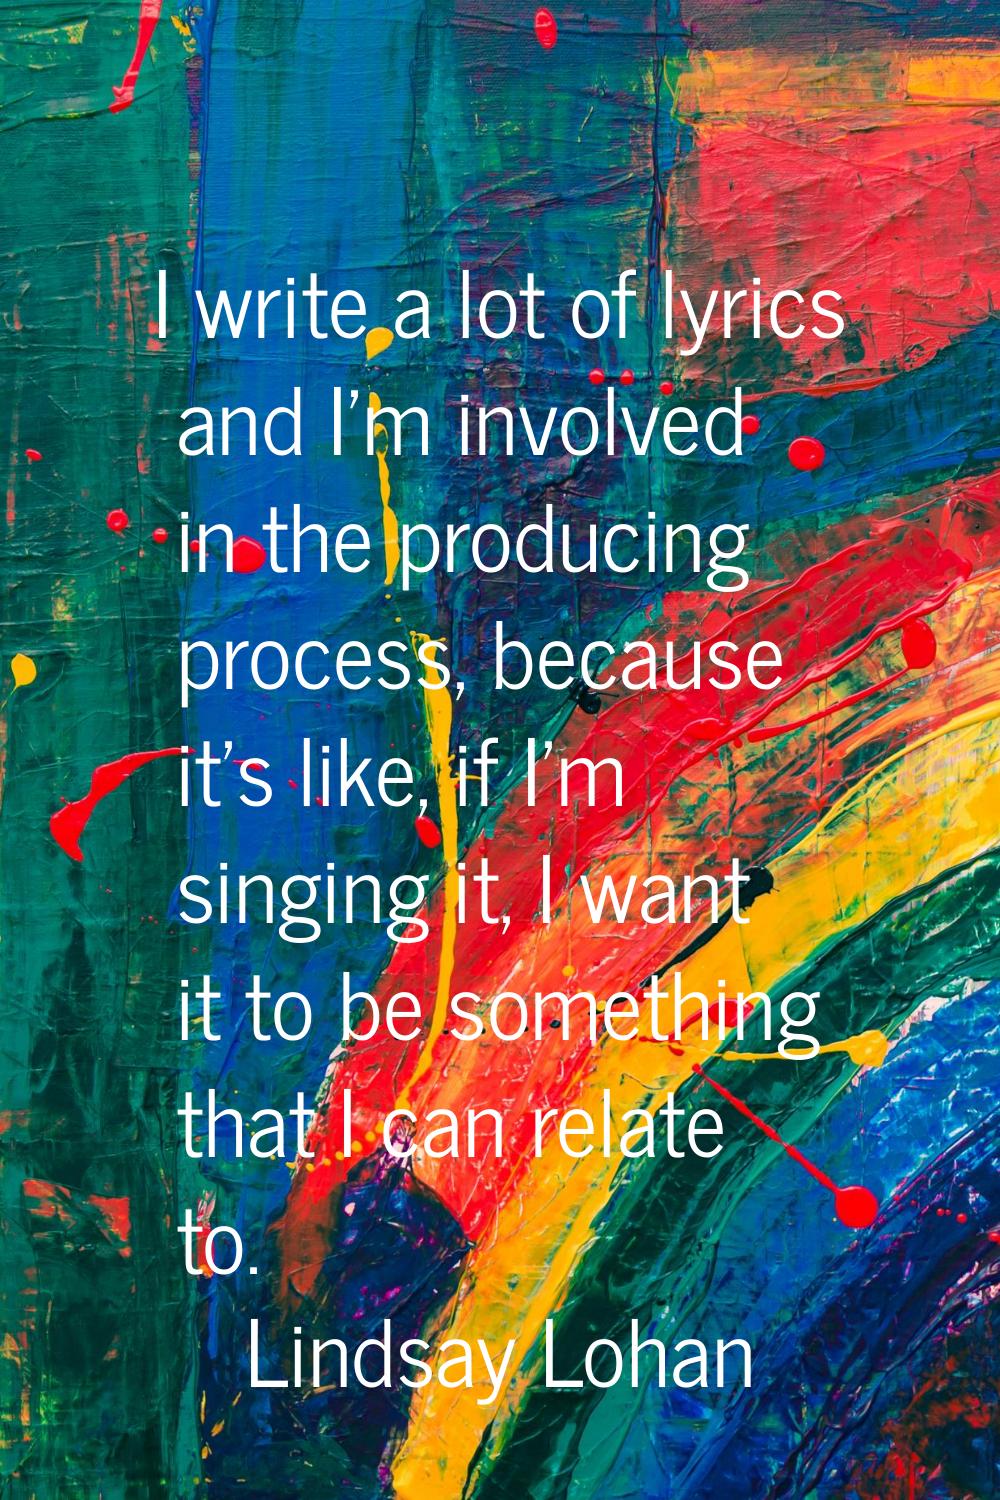 I write a lot of lyrics and I'm involved in the producing process, because it's like, if I'm singin